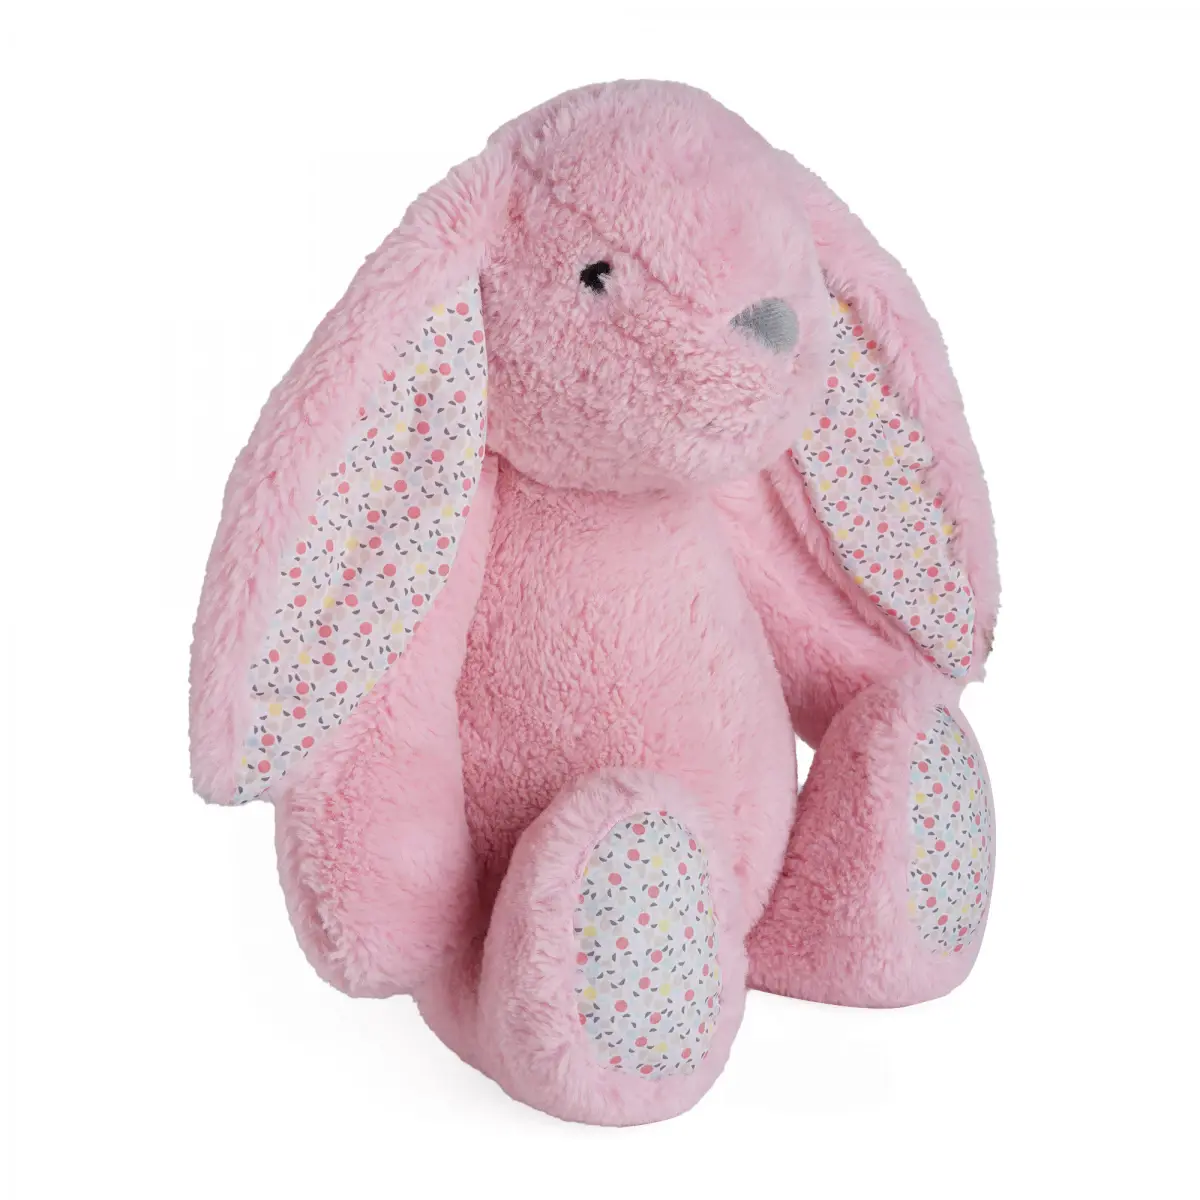 Bunny Huggable Cuddly Stuffed Toy By Fuzzbuzz, Soft Toys for Kids, Cute Plushies Pink For Kids Of Age 2 Years & Above